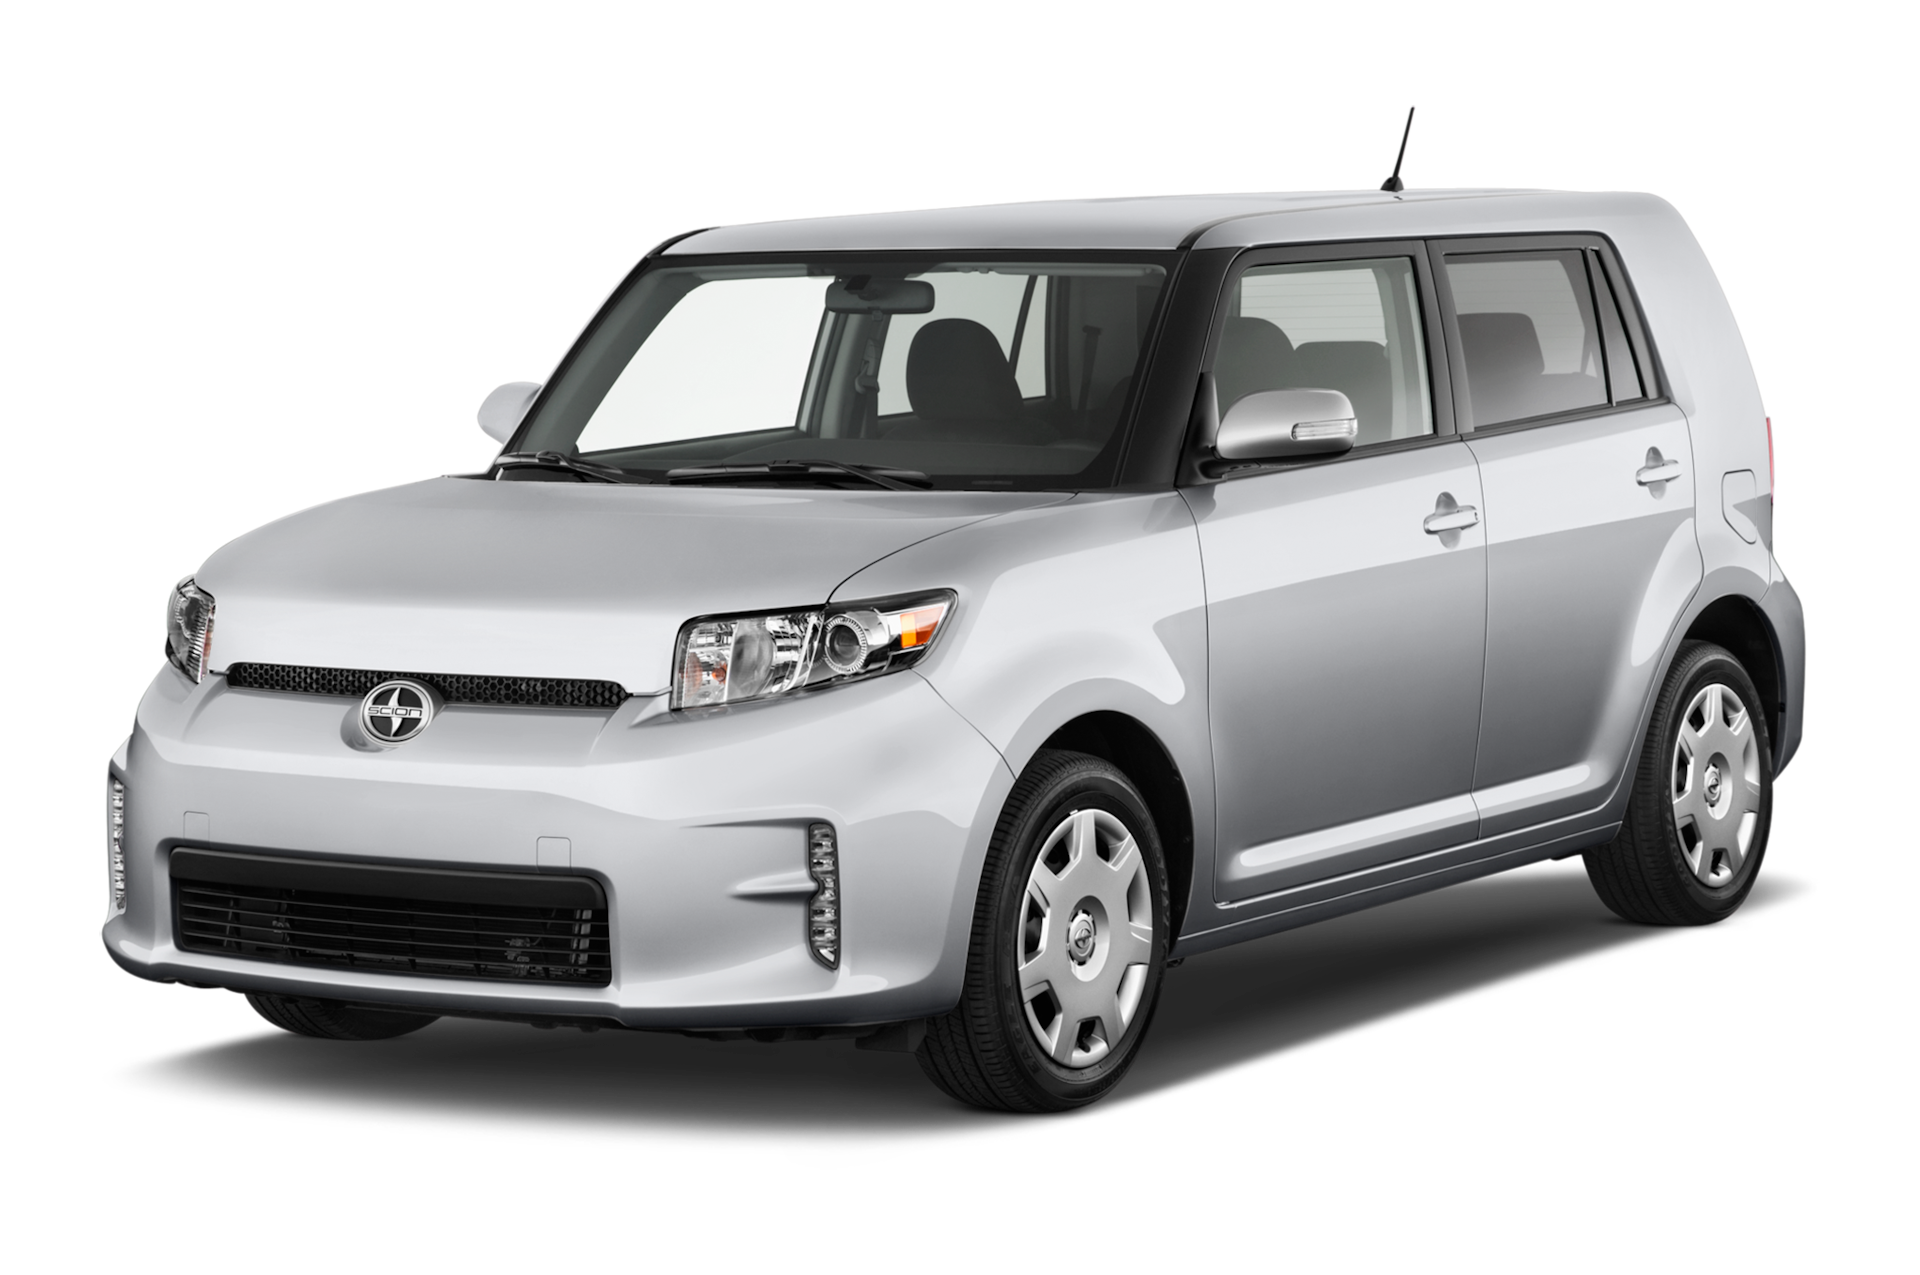 2014 Scion XB Prices, Reviews, and Photos - MotorTrend